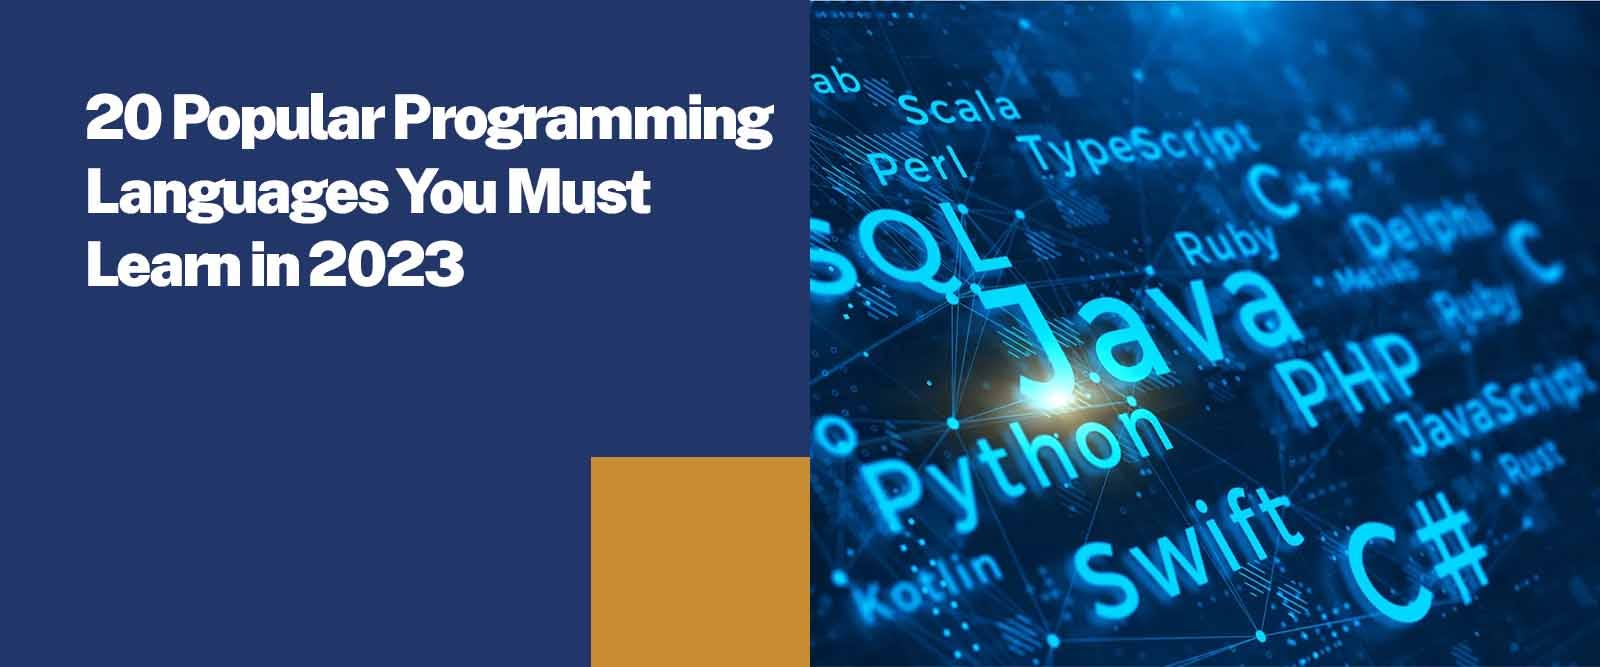 20 Most Popular Programming Languages to Learn in 2023  Sunstone Blog